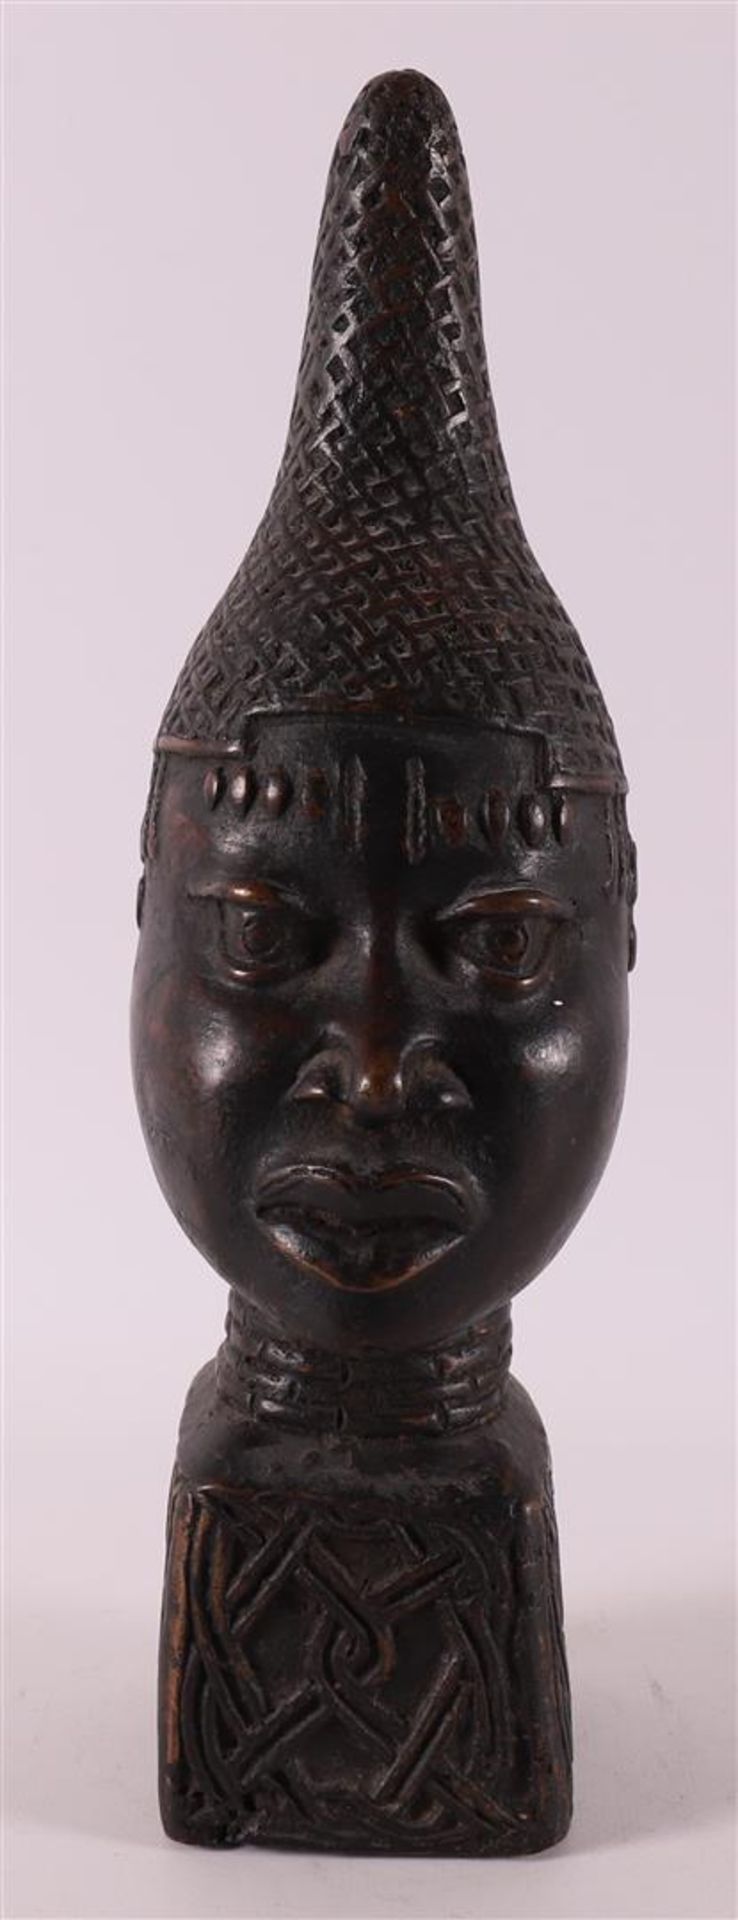 A brown patinated bronze bust of a mother, Benin style, 20th century.